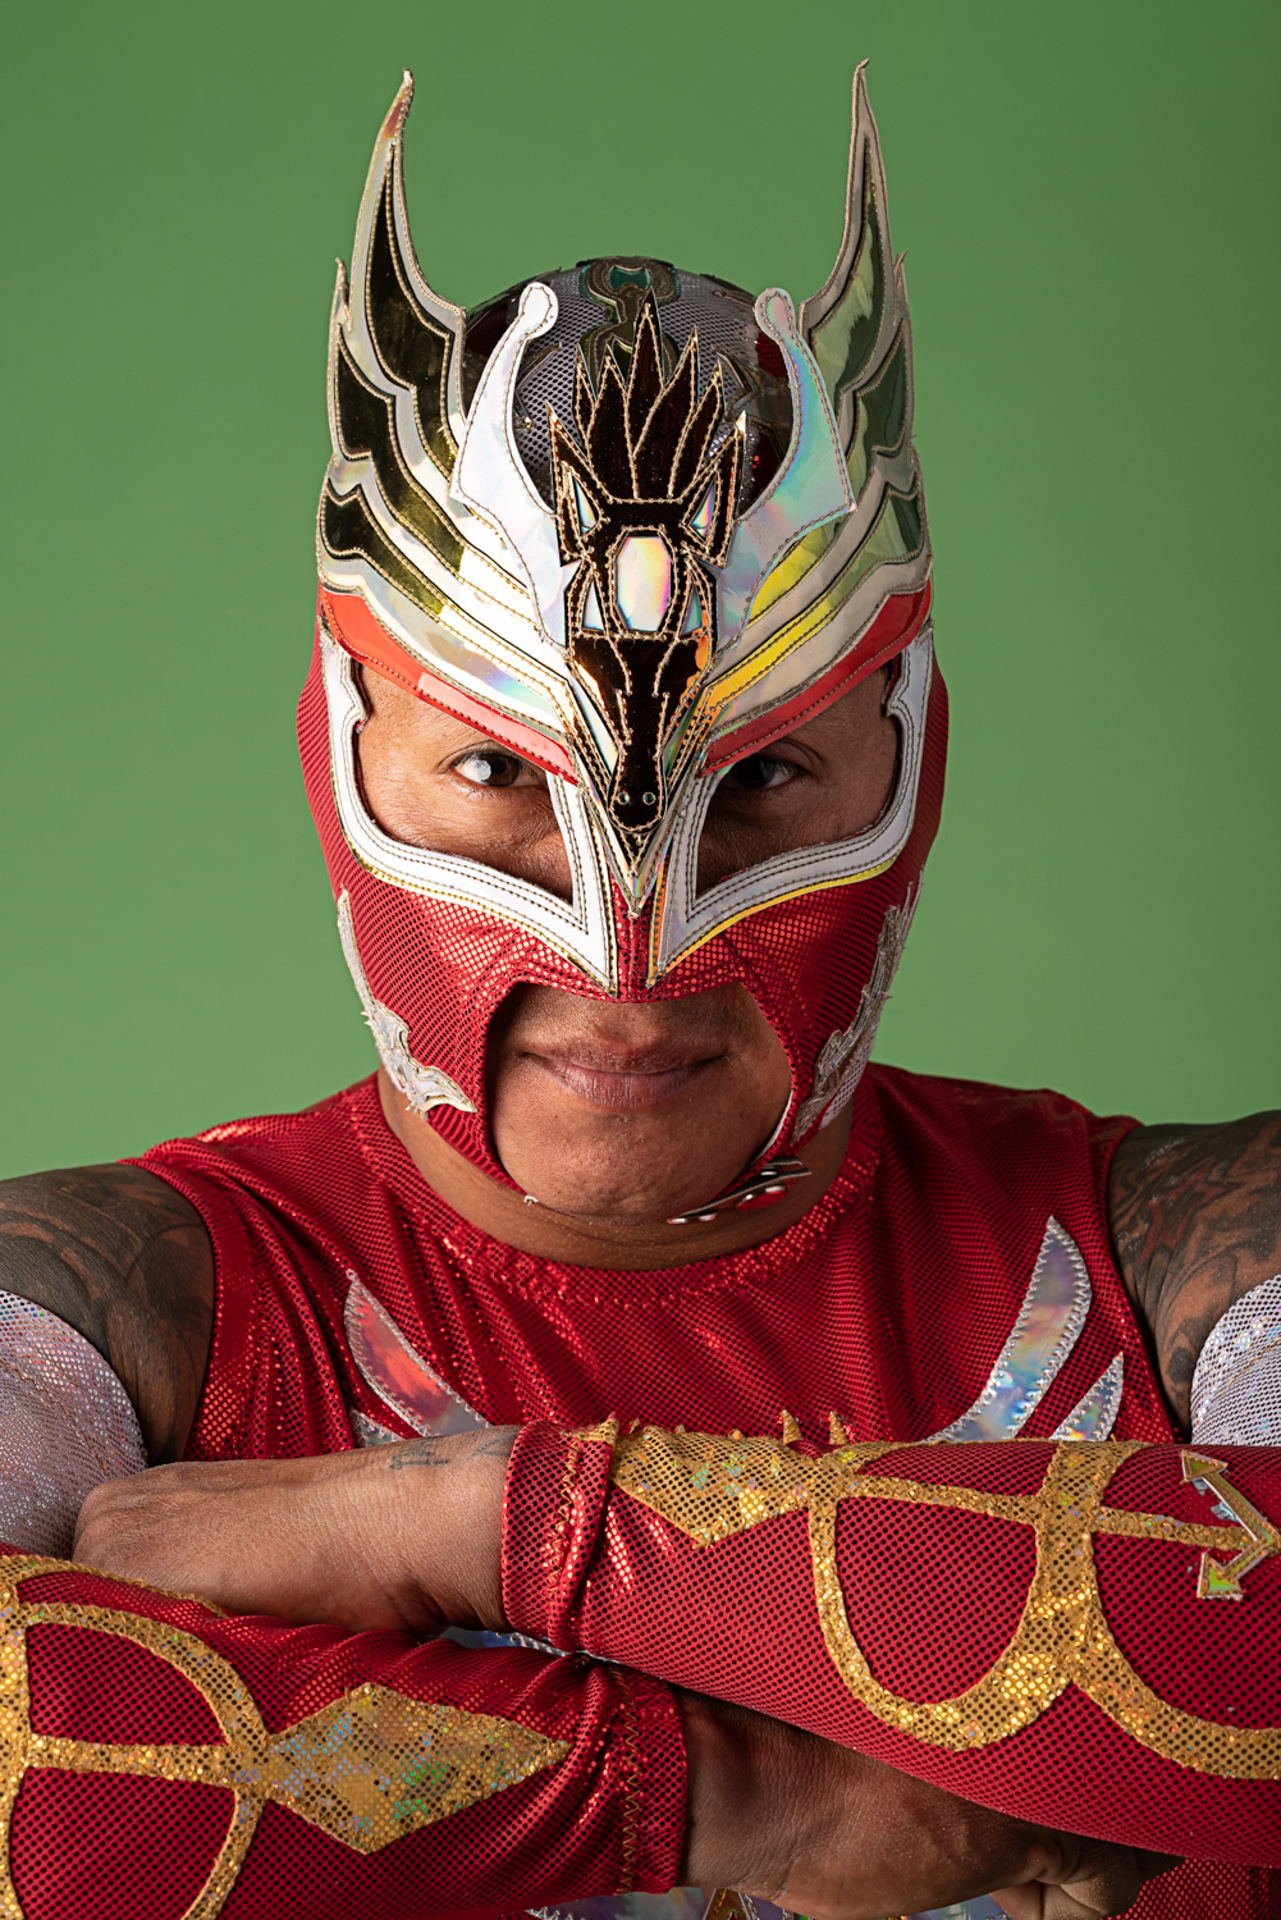 This photo is a portrait of a Lucha Libre wrestler. The wrestler is wearing a red, gold, and silver mask with a pegasus and flared wings on the top head section. His arms are crossed displaying the gold and silver embroidery on the arm sleeves and t-shirt portion. The Lucha Libre is standing in front of a bright green background.